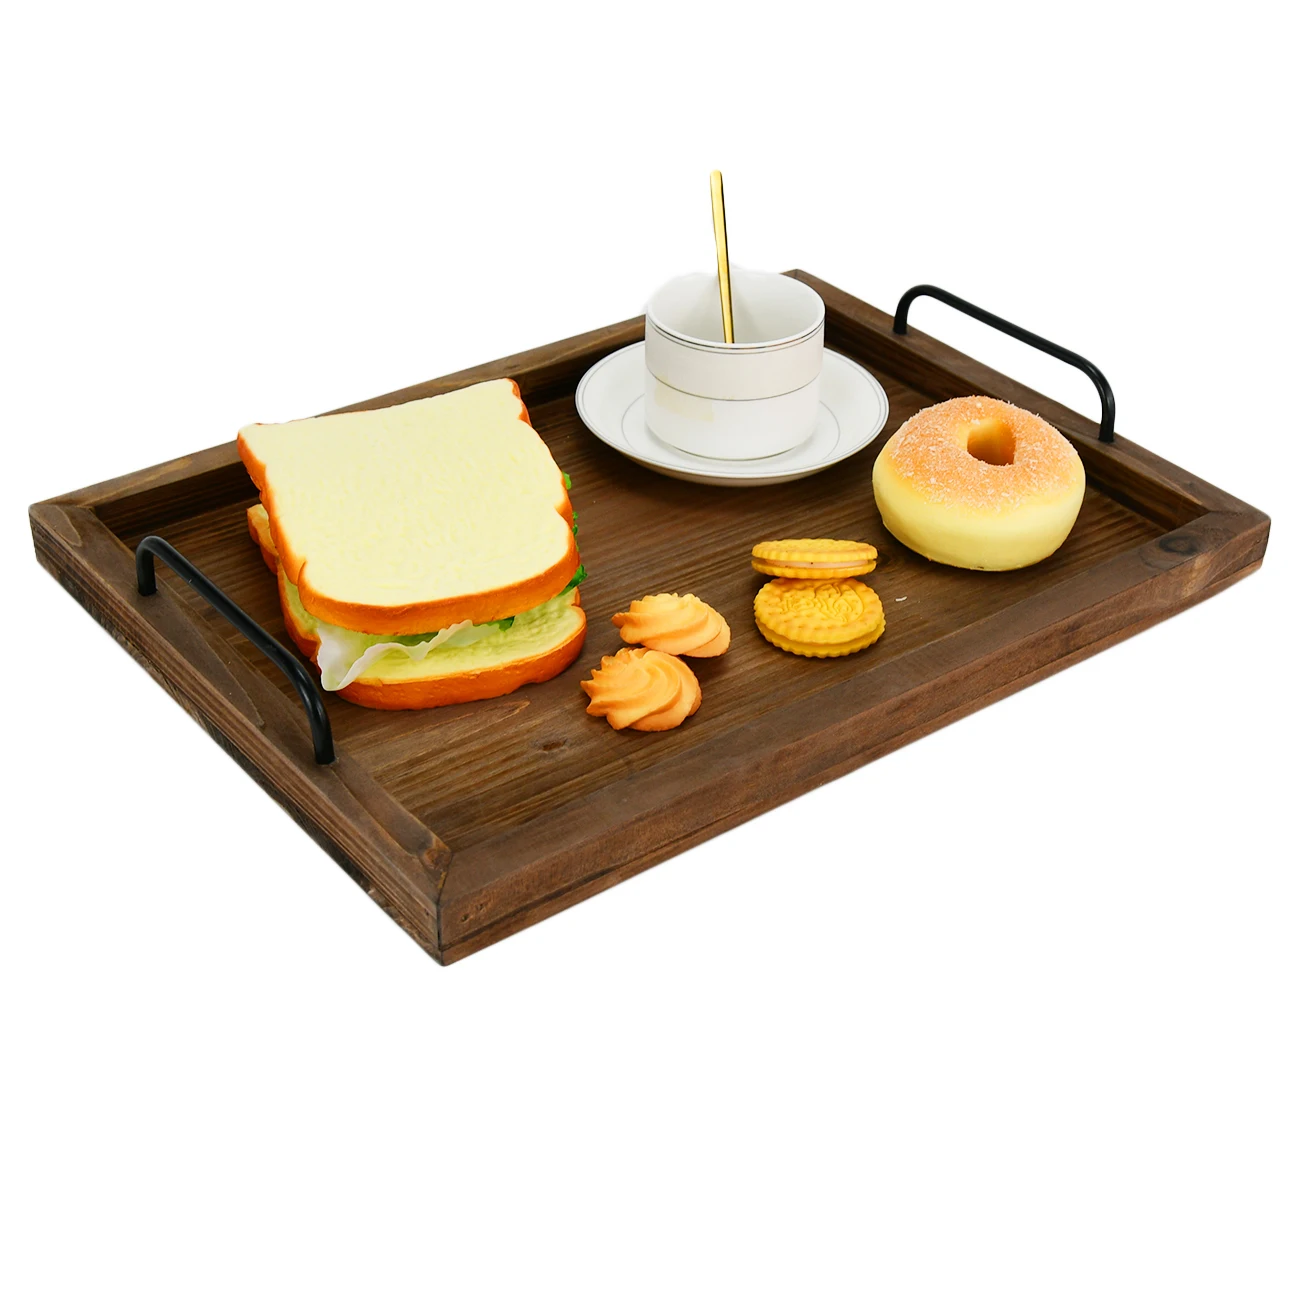 MyGift Rustic Style Wood Chalkboard Surface Nesting Breakfast Serving Trays with Decorative Handles Set of 2 